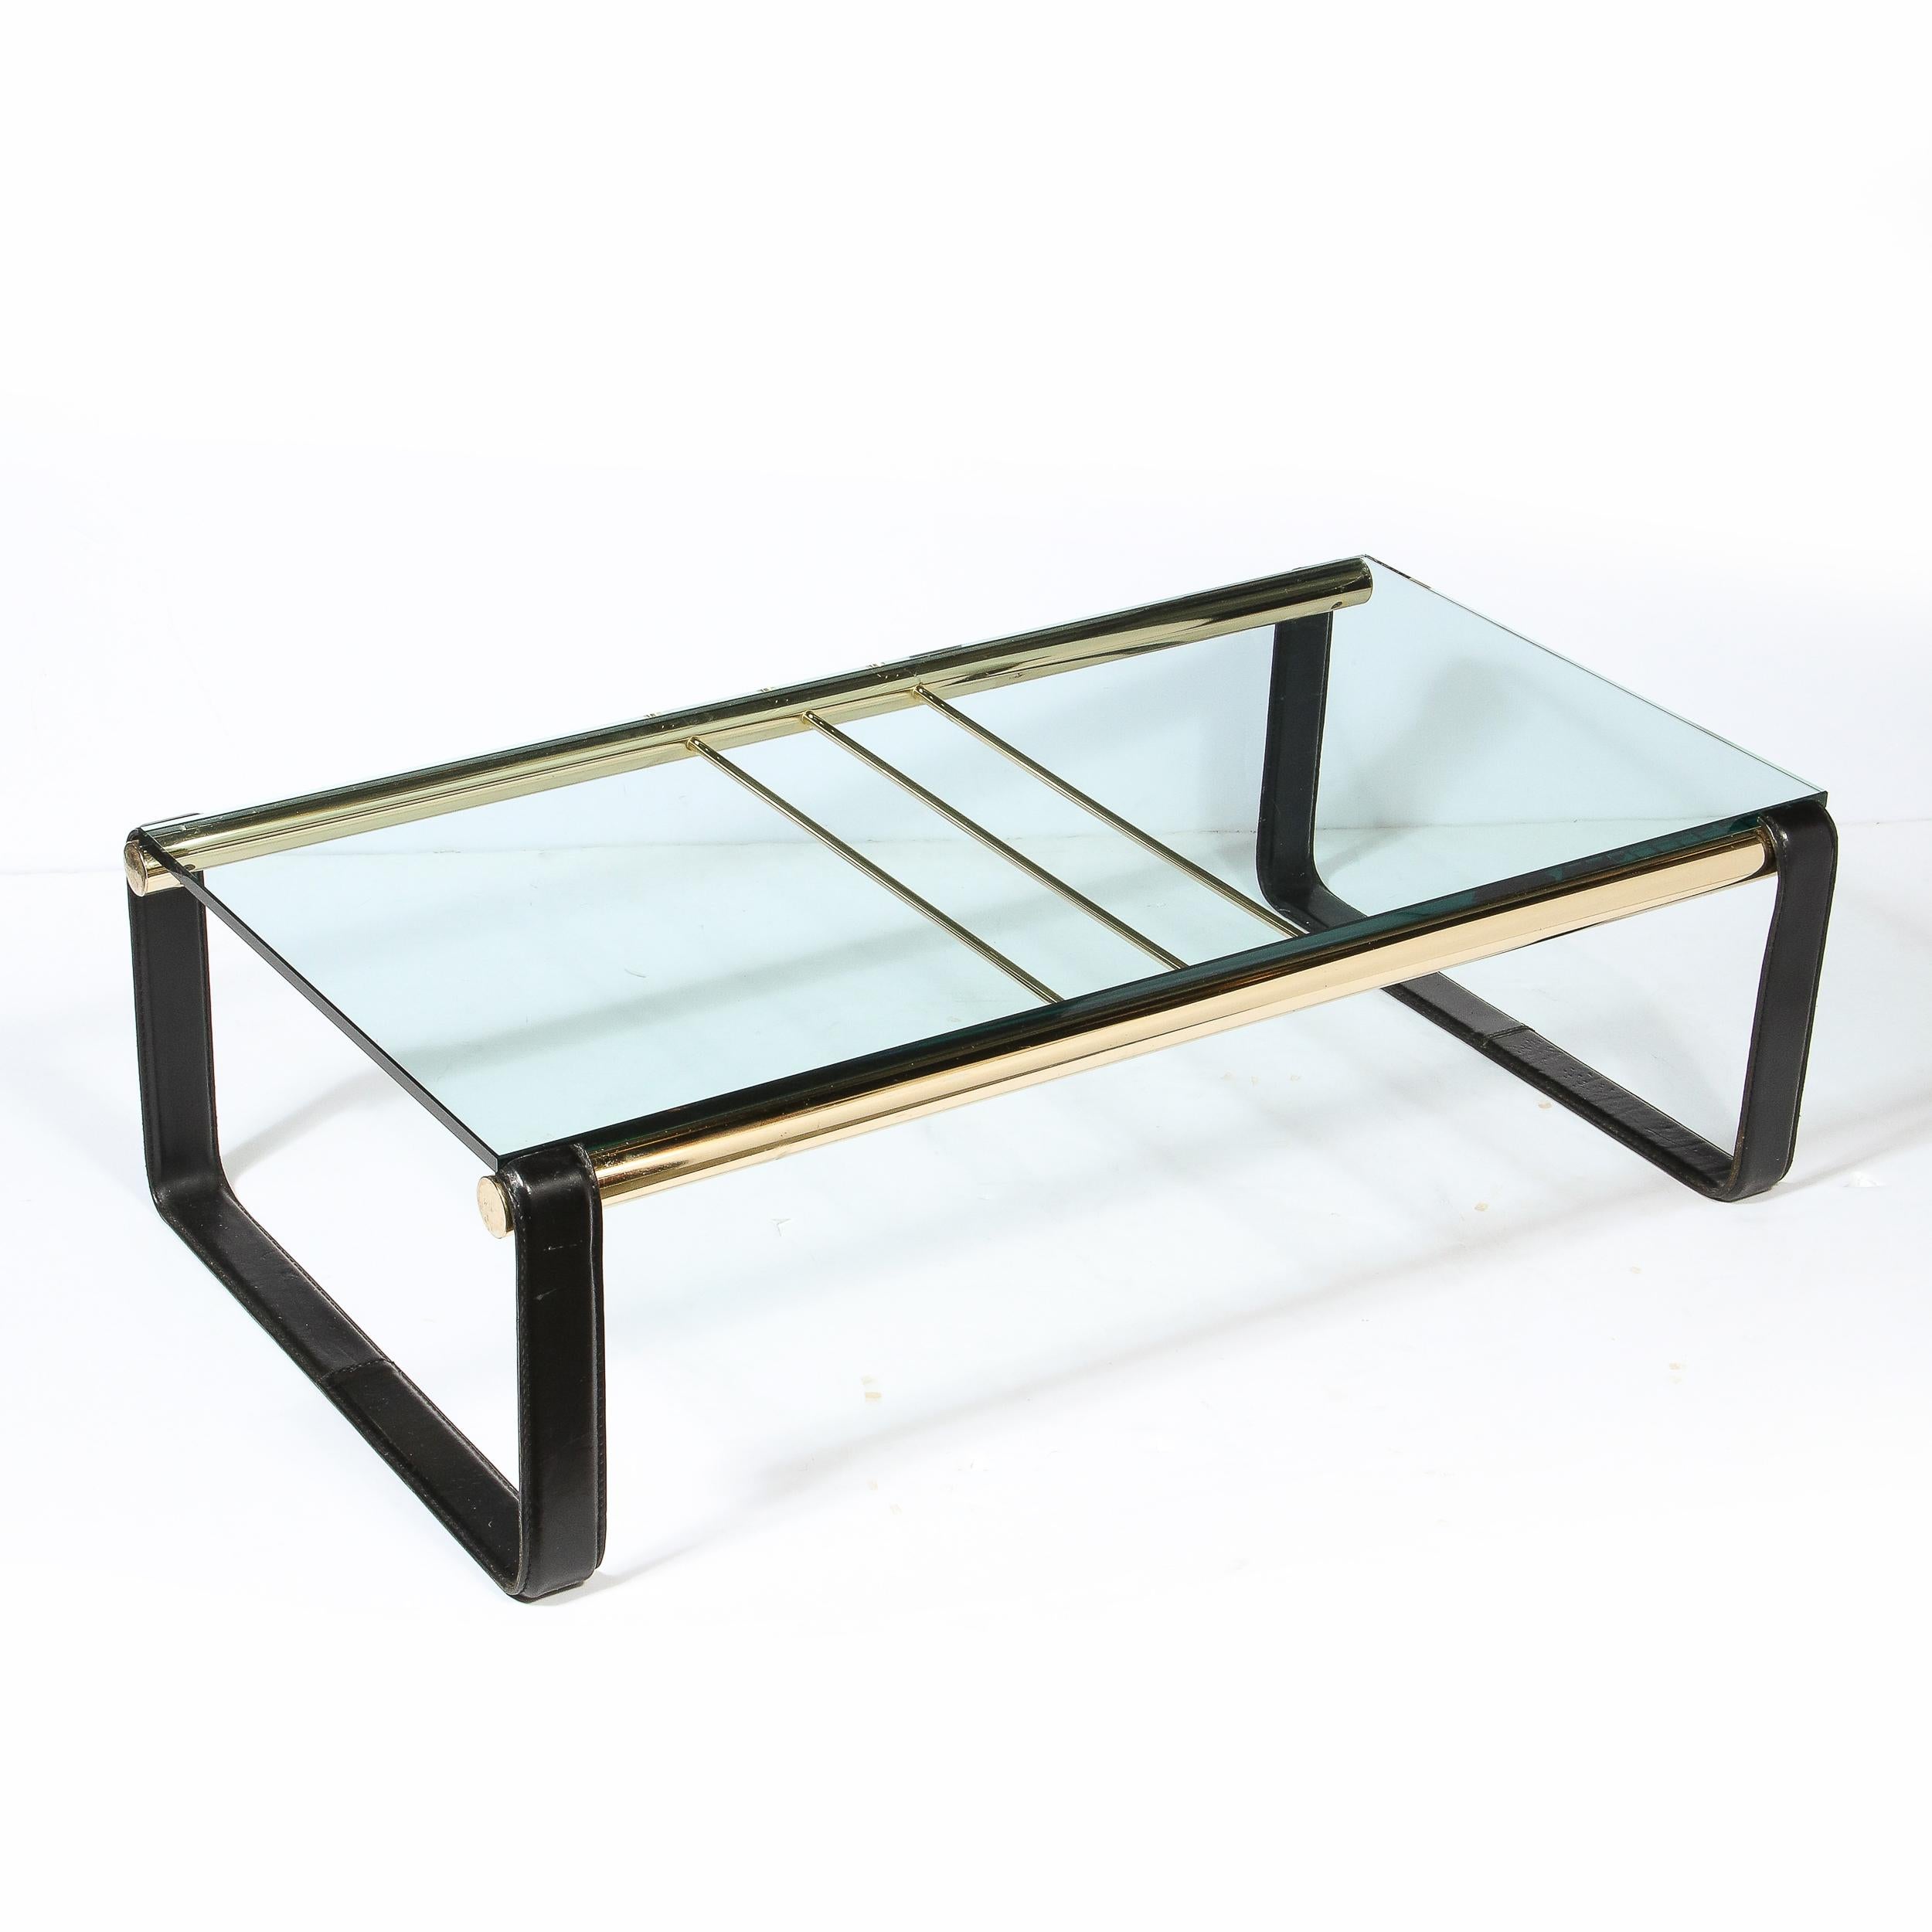 20th Century Scandinavian Mid-Century Modern Brass, Black Leather & Glass Cocktail Table For Sale